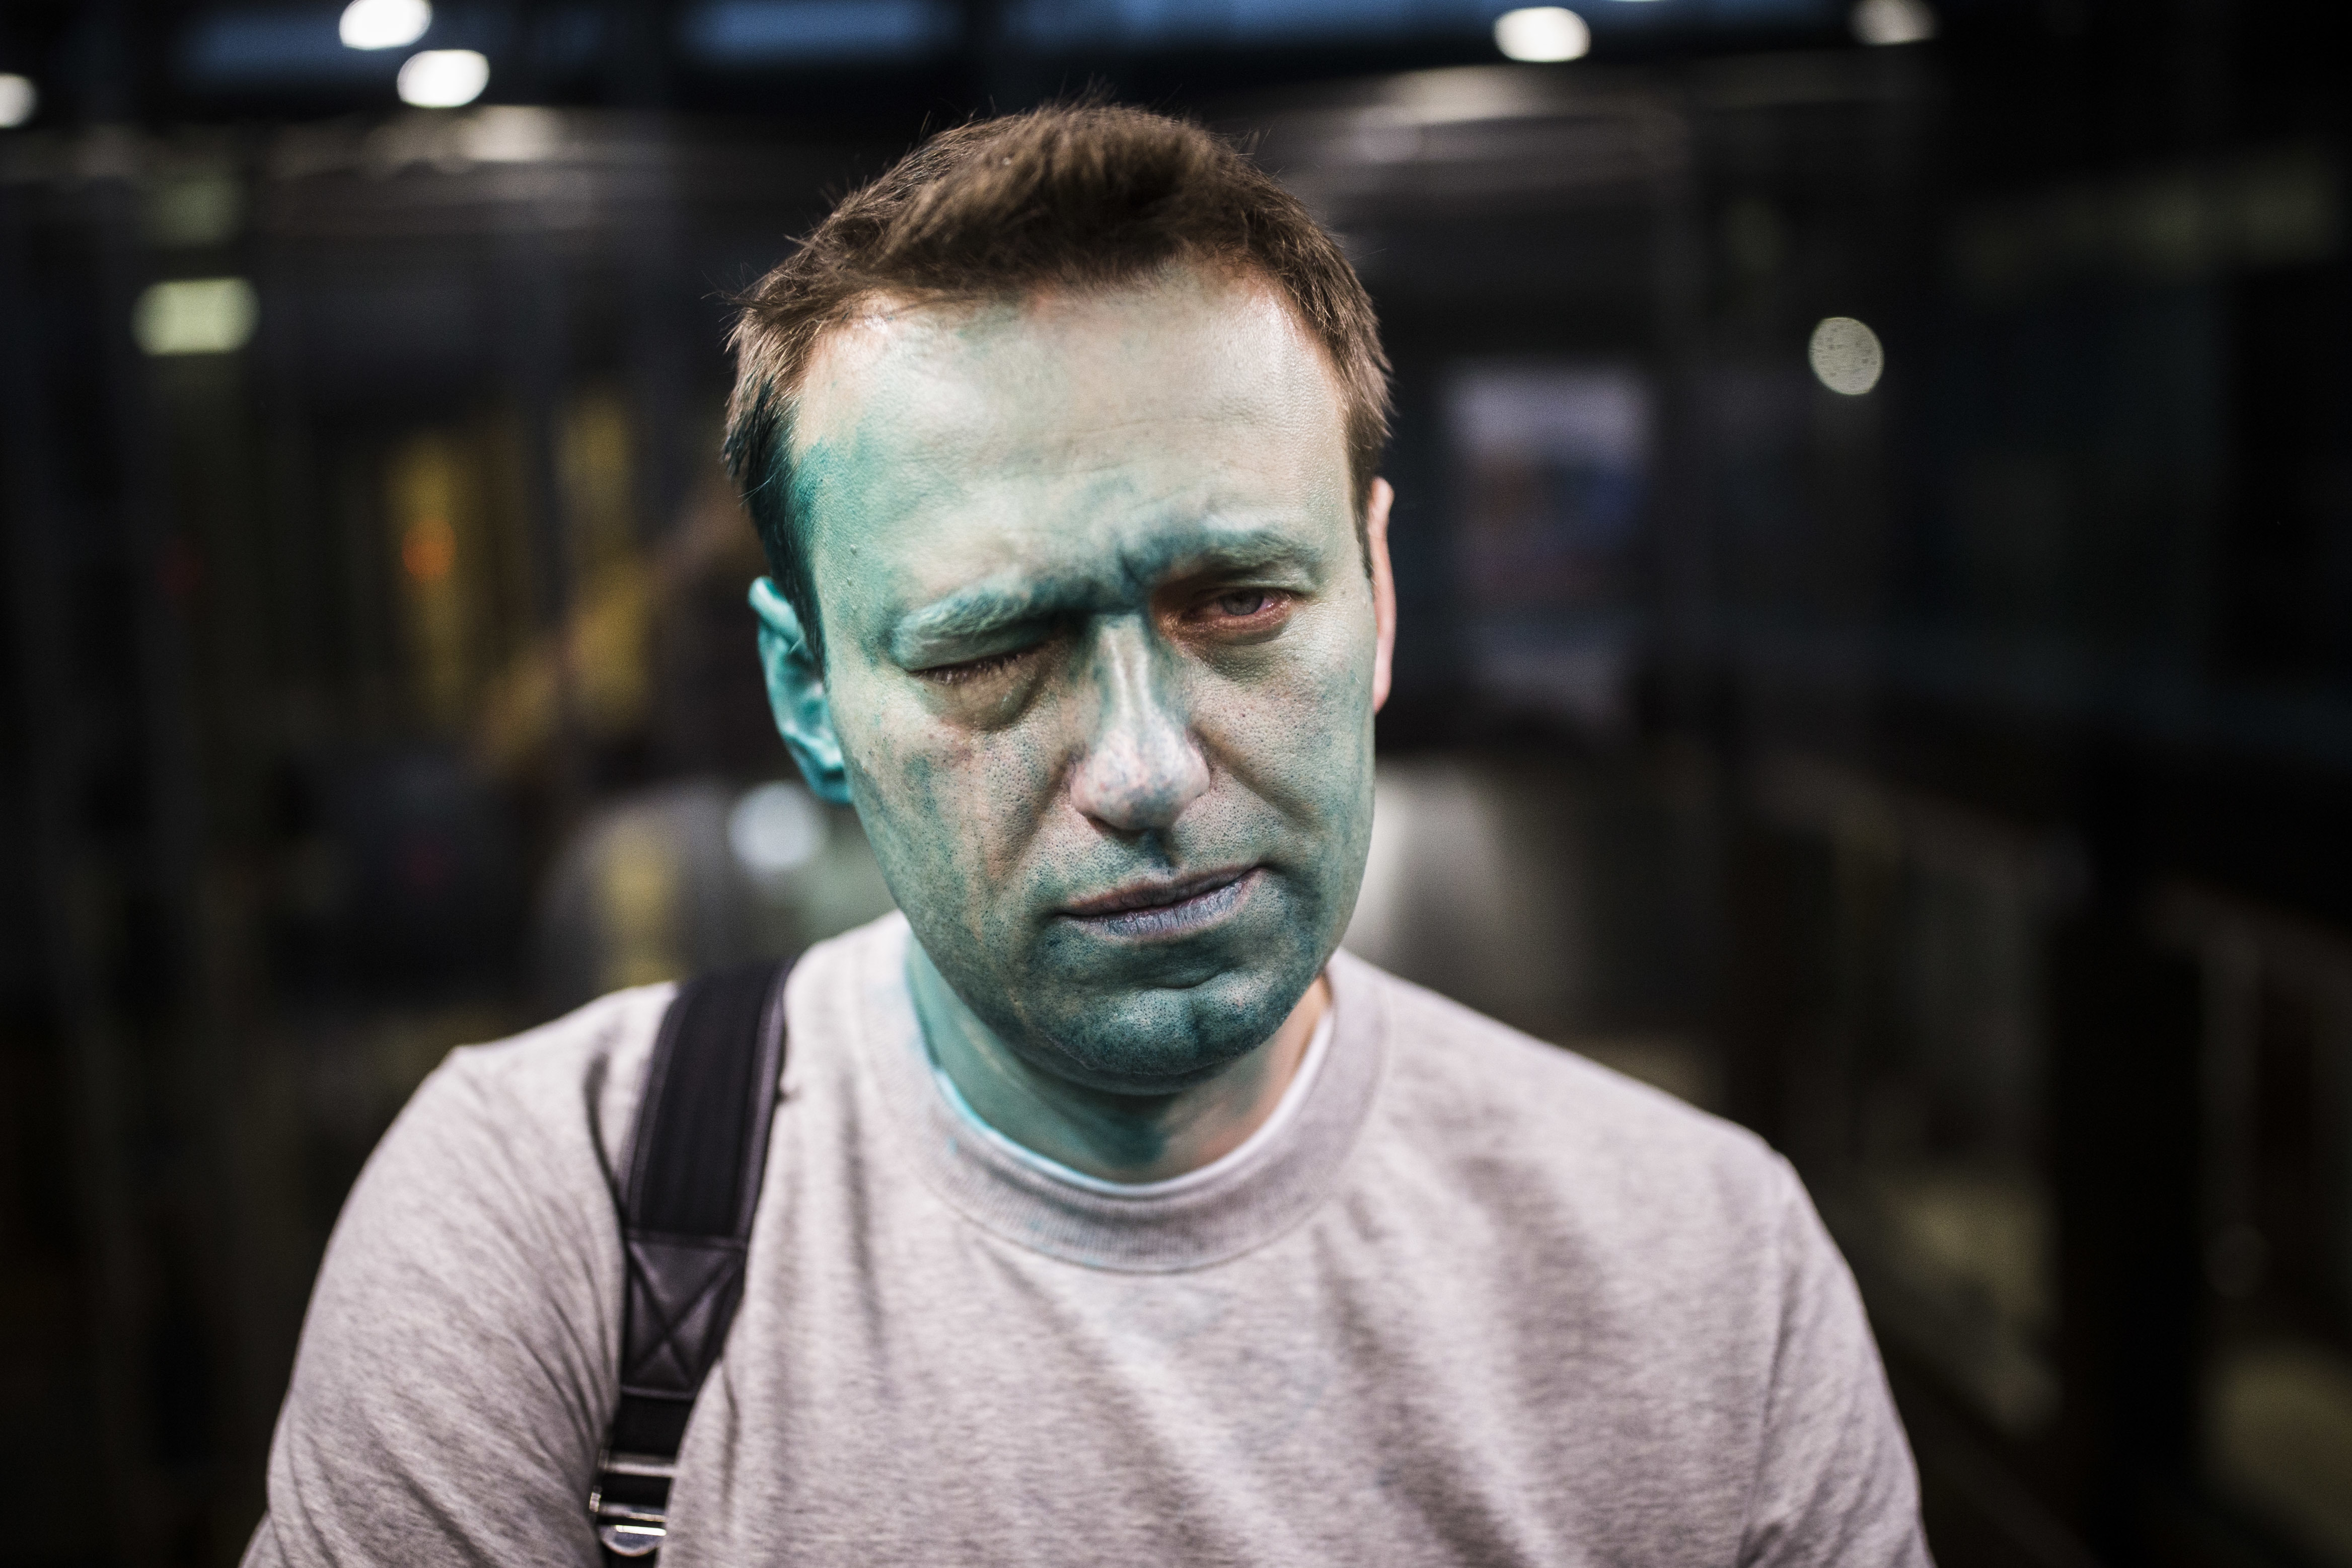 Navalny poses for a photo after unknown attackers splashed him in the face with an antiseptic green dye in April 2017. The attack caused vision damage in one eye.